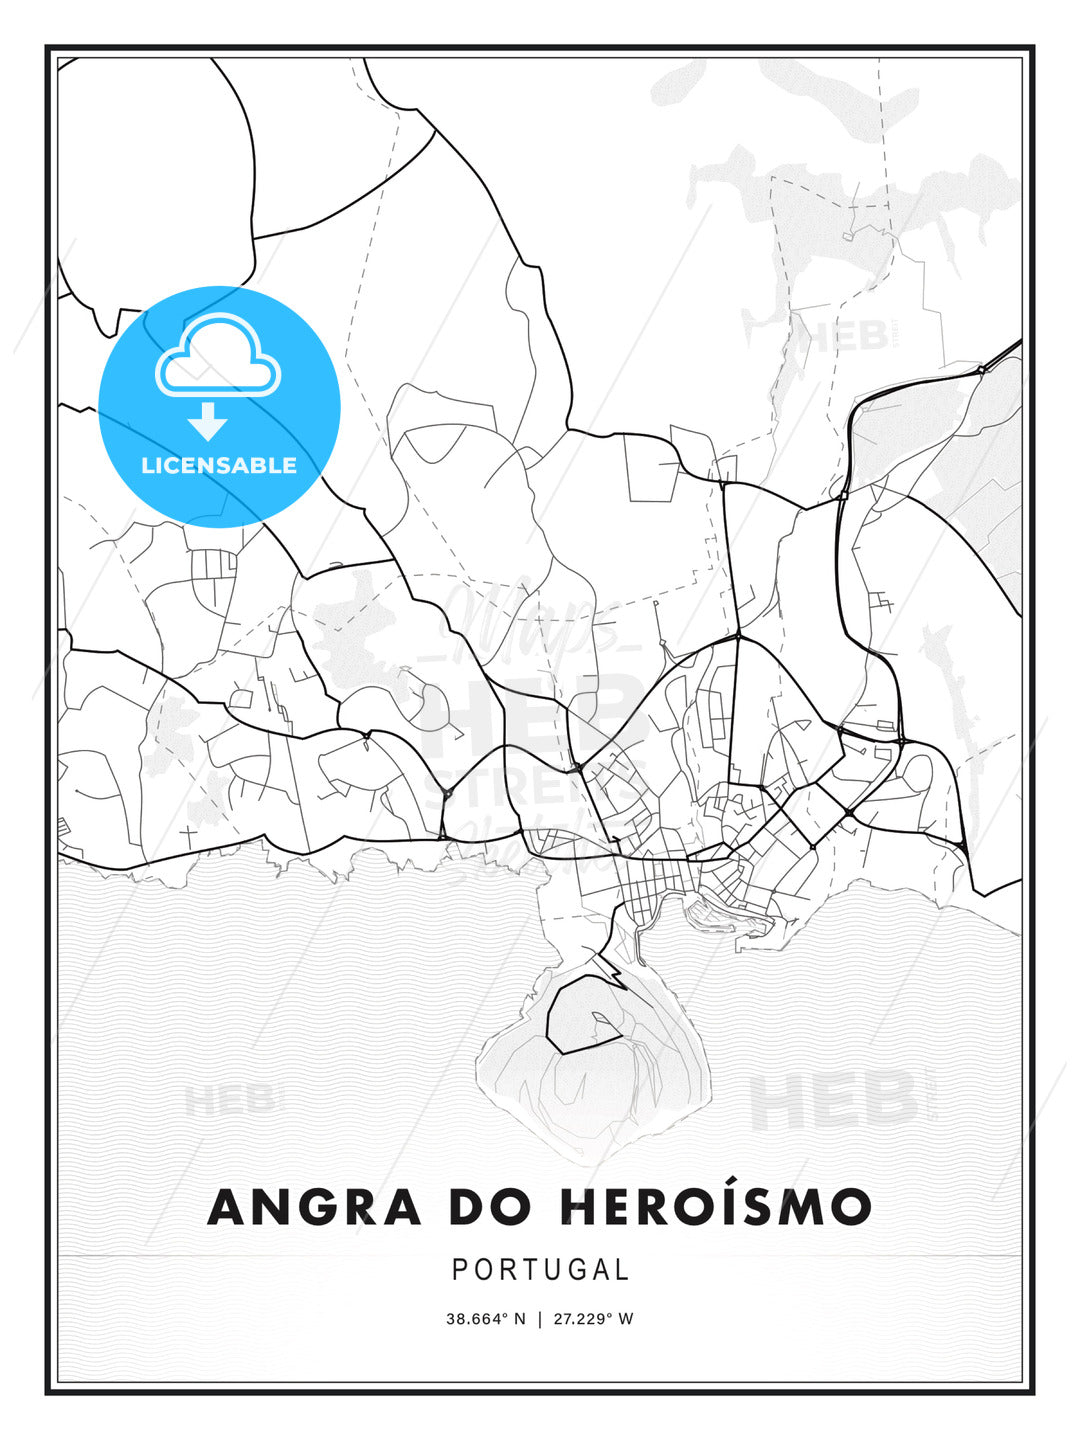 Angra do Heroísmo, Portugal, Modern Print Template in Various Formats - HEBSTREITS Sketches